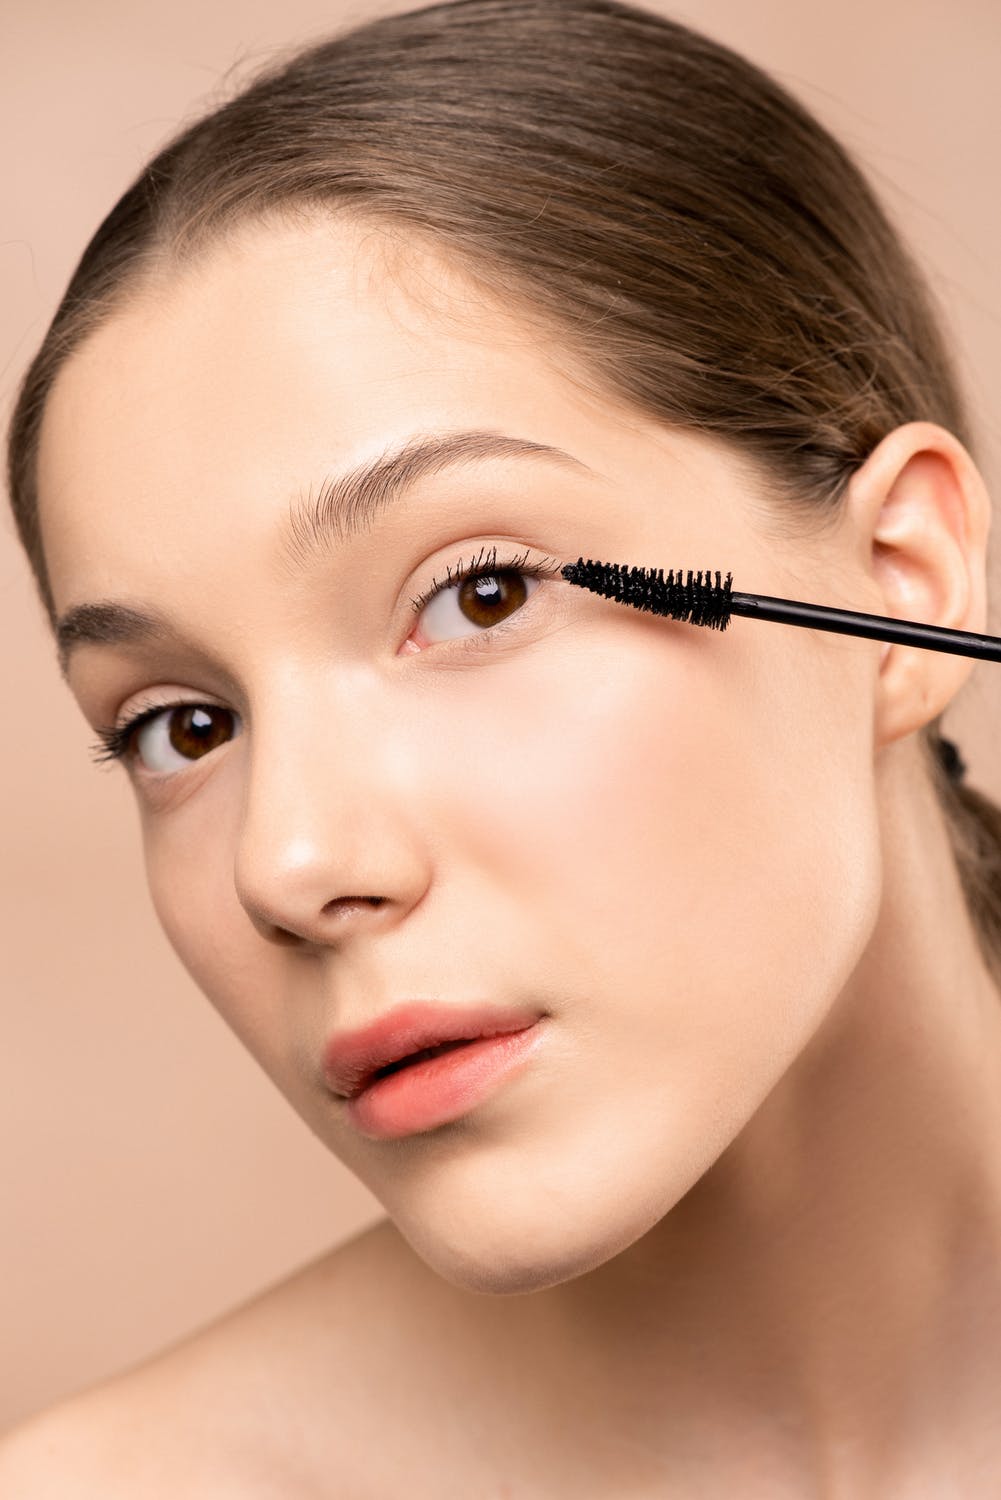 5 Tips For Simple, Everyday Makeup Looks That Will Leave You Glowing